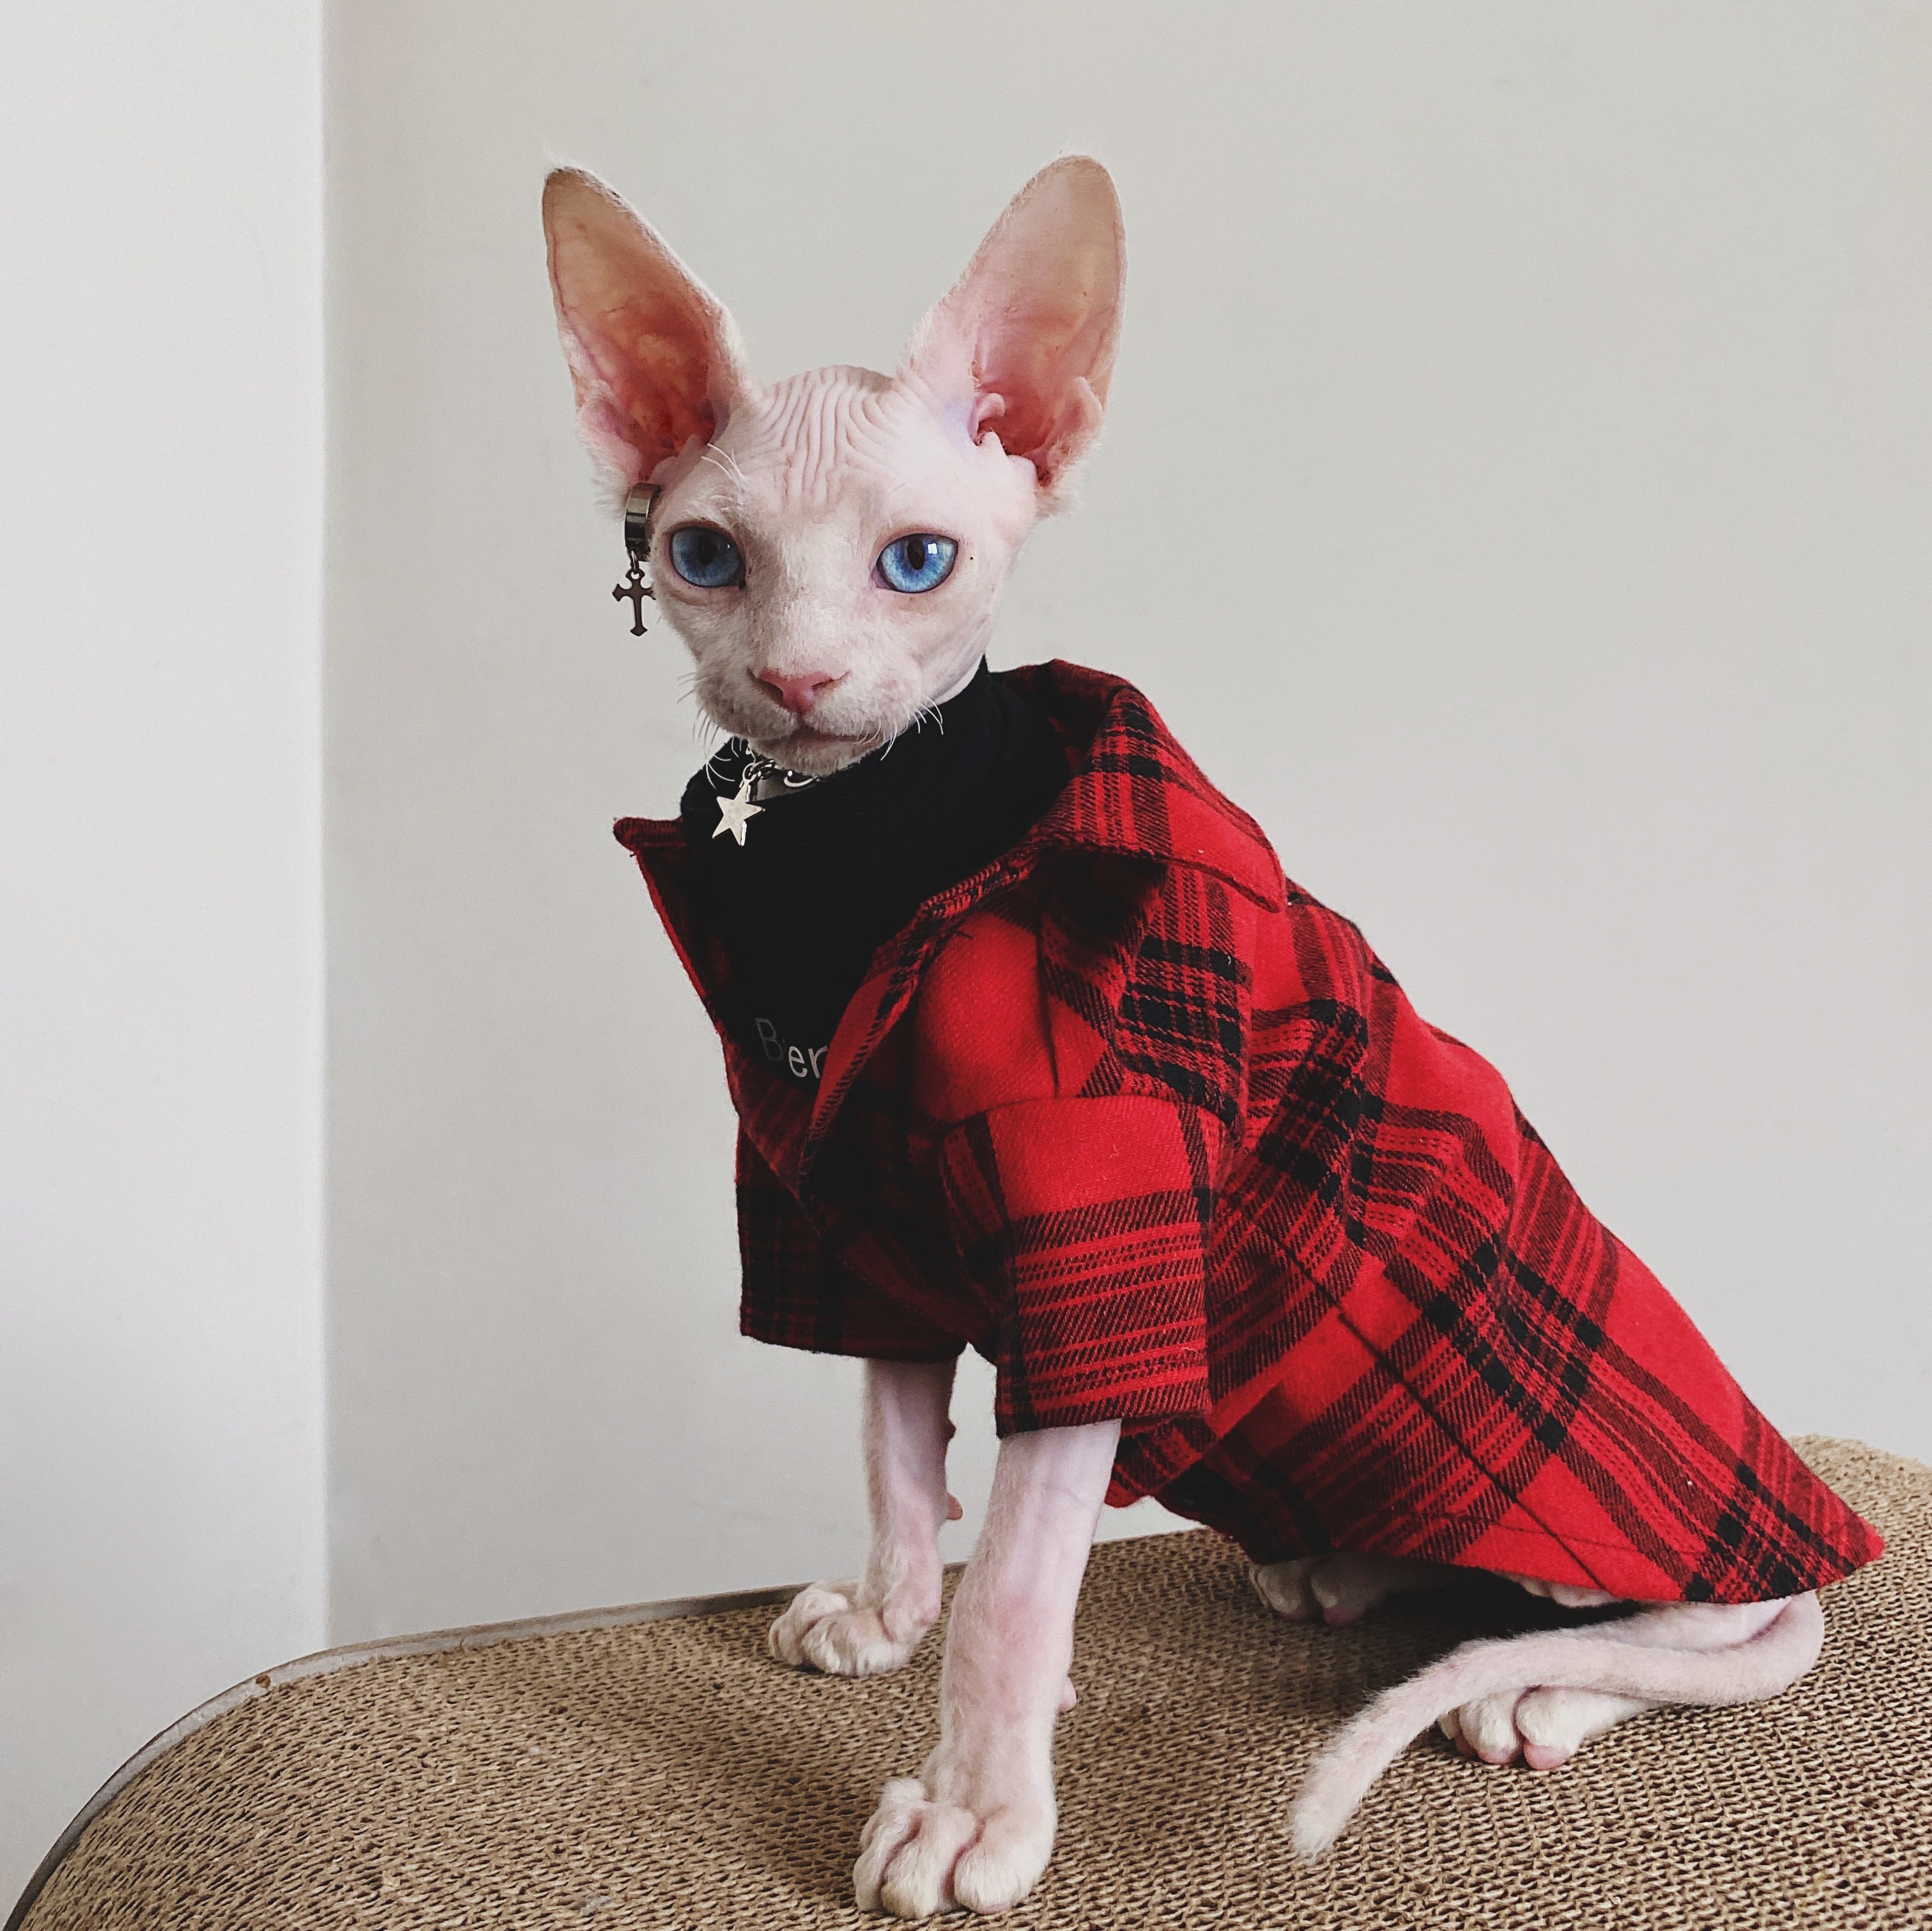 Flannel Shirt for Cat - Shirts for Cats